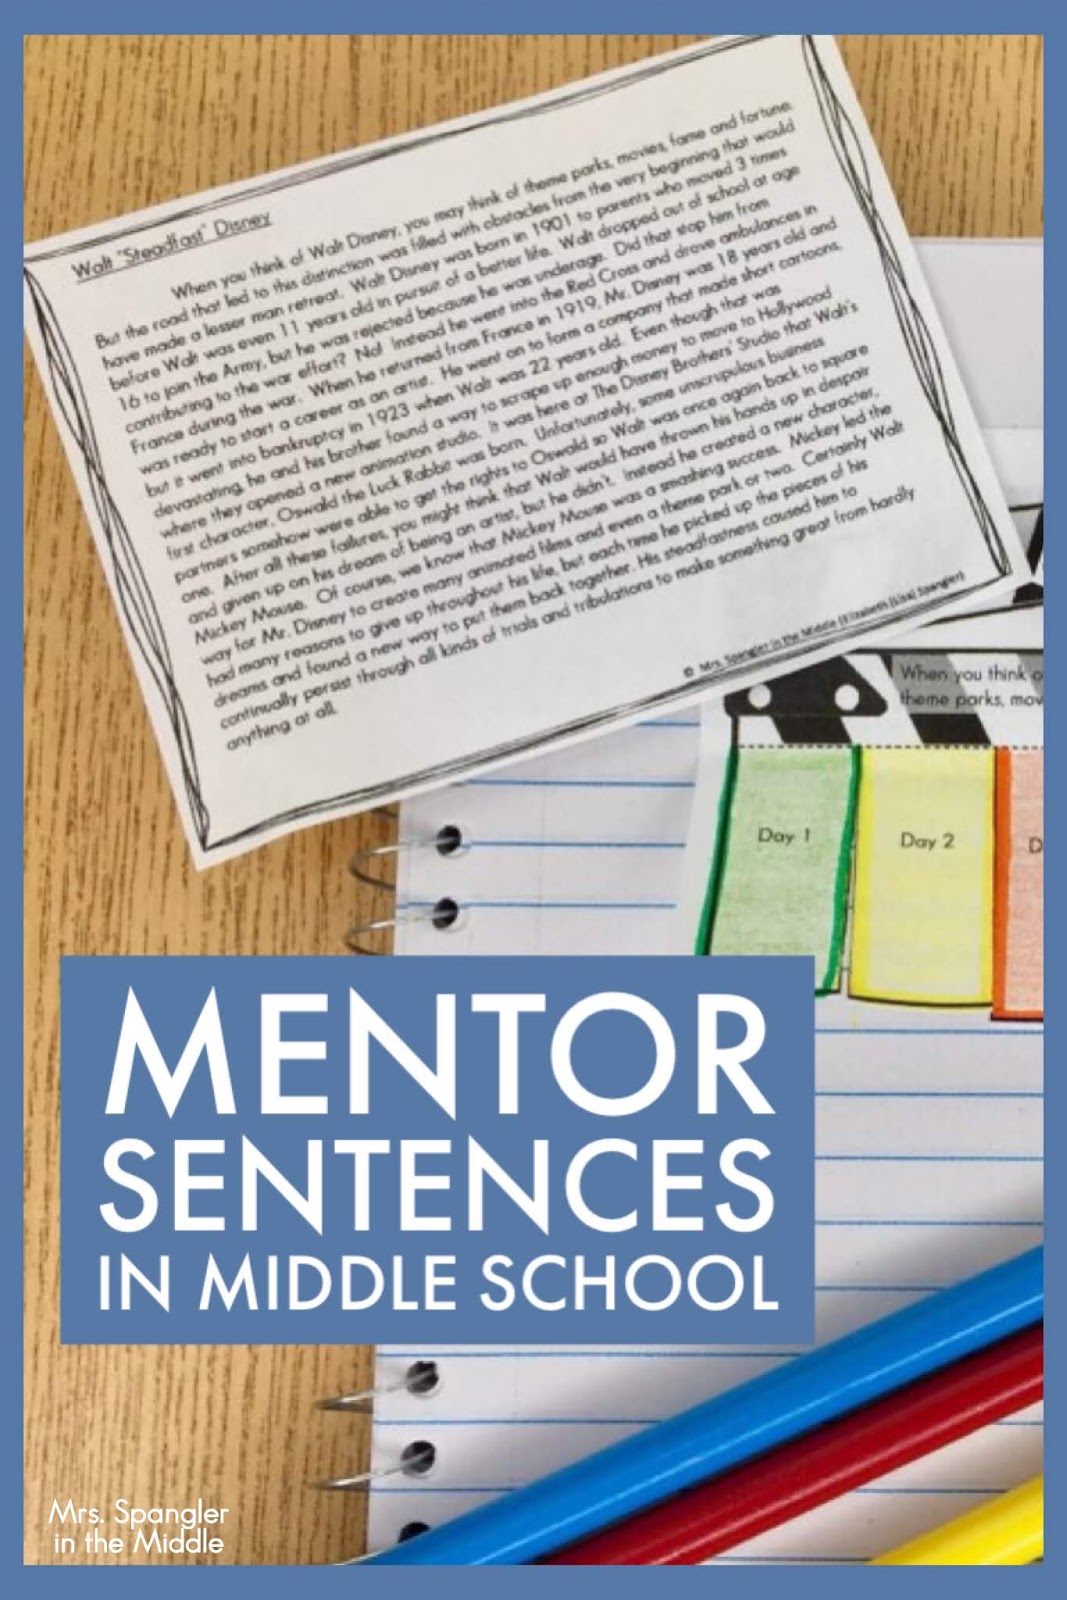 mentor-sentences-in-middle-school-mrs-spangler-in-the-middle